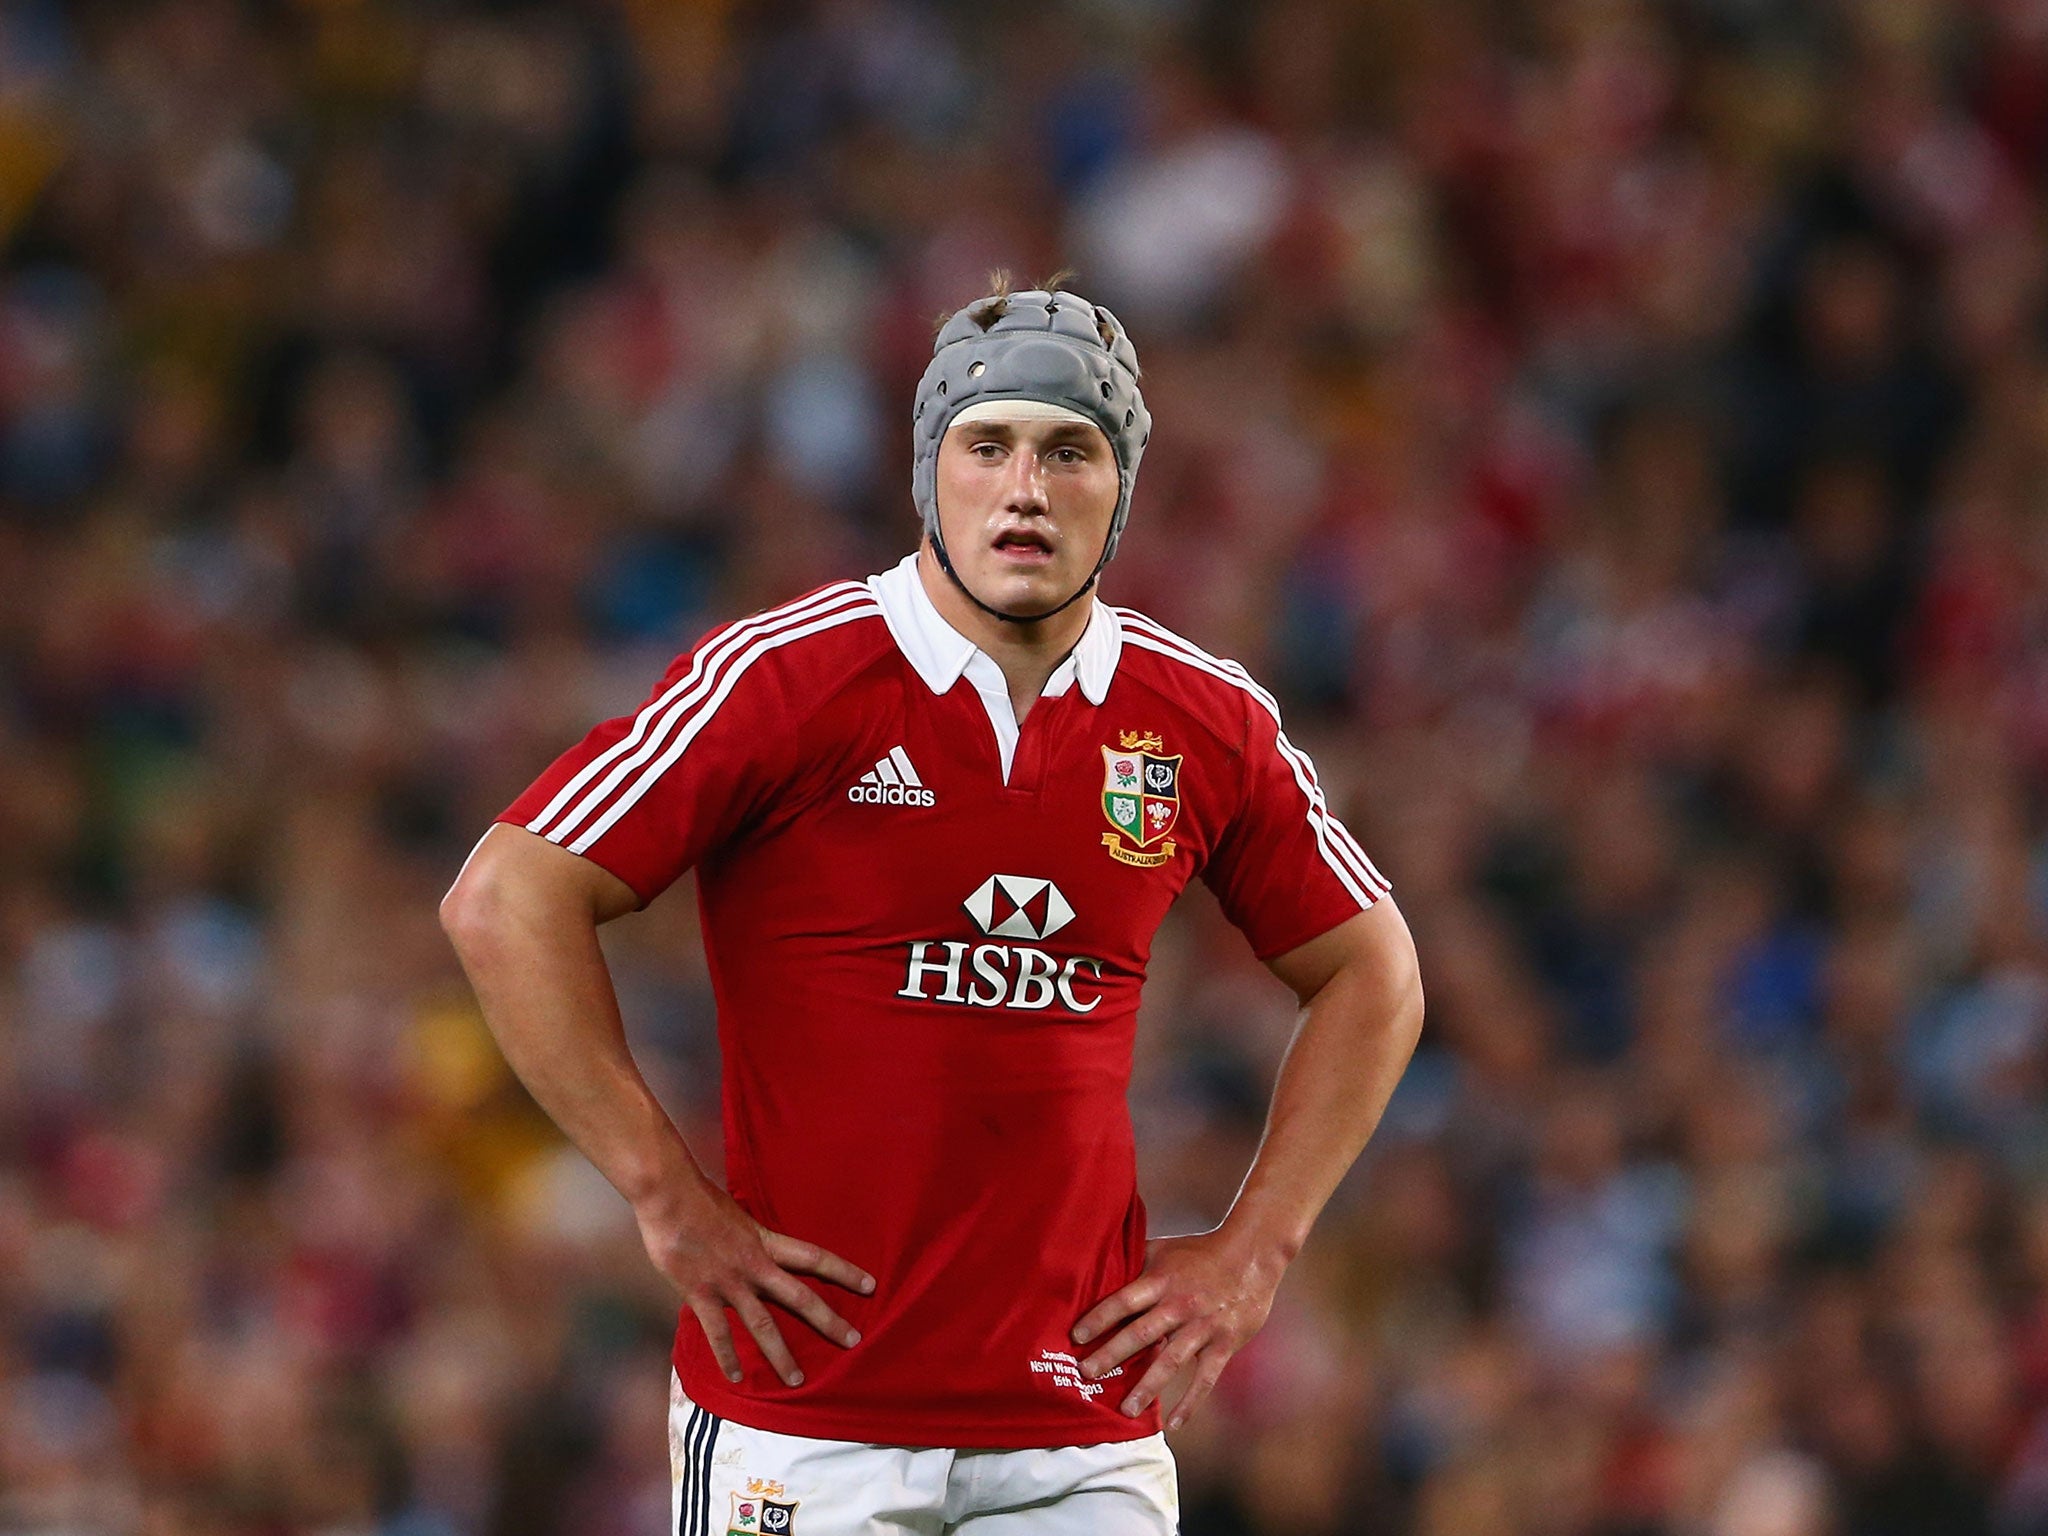 Warren Gatland faces a selection conundrum when it comes to the outside centre role